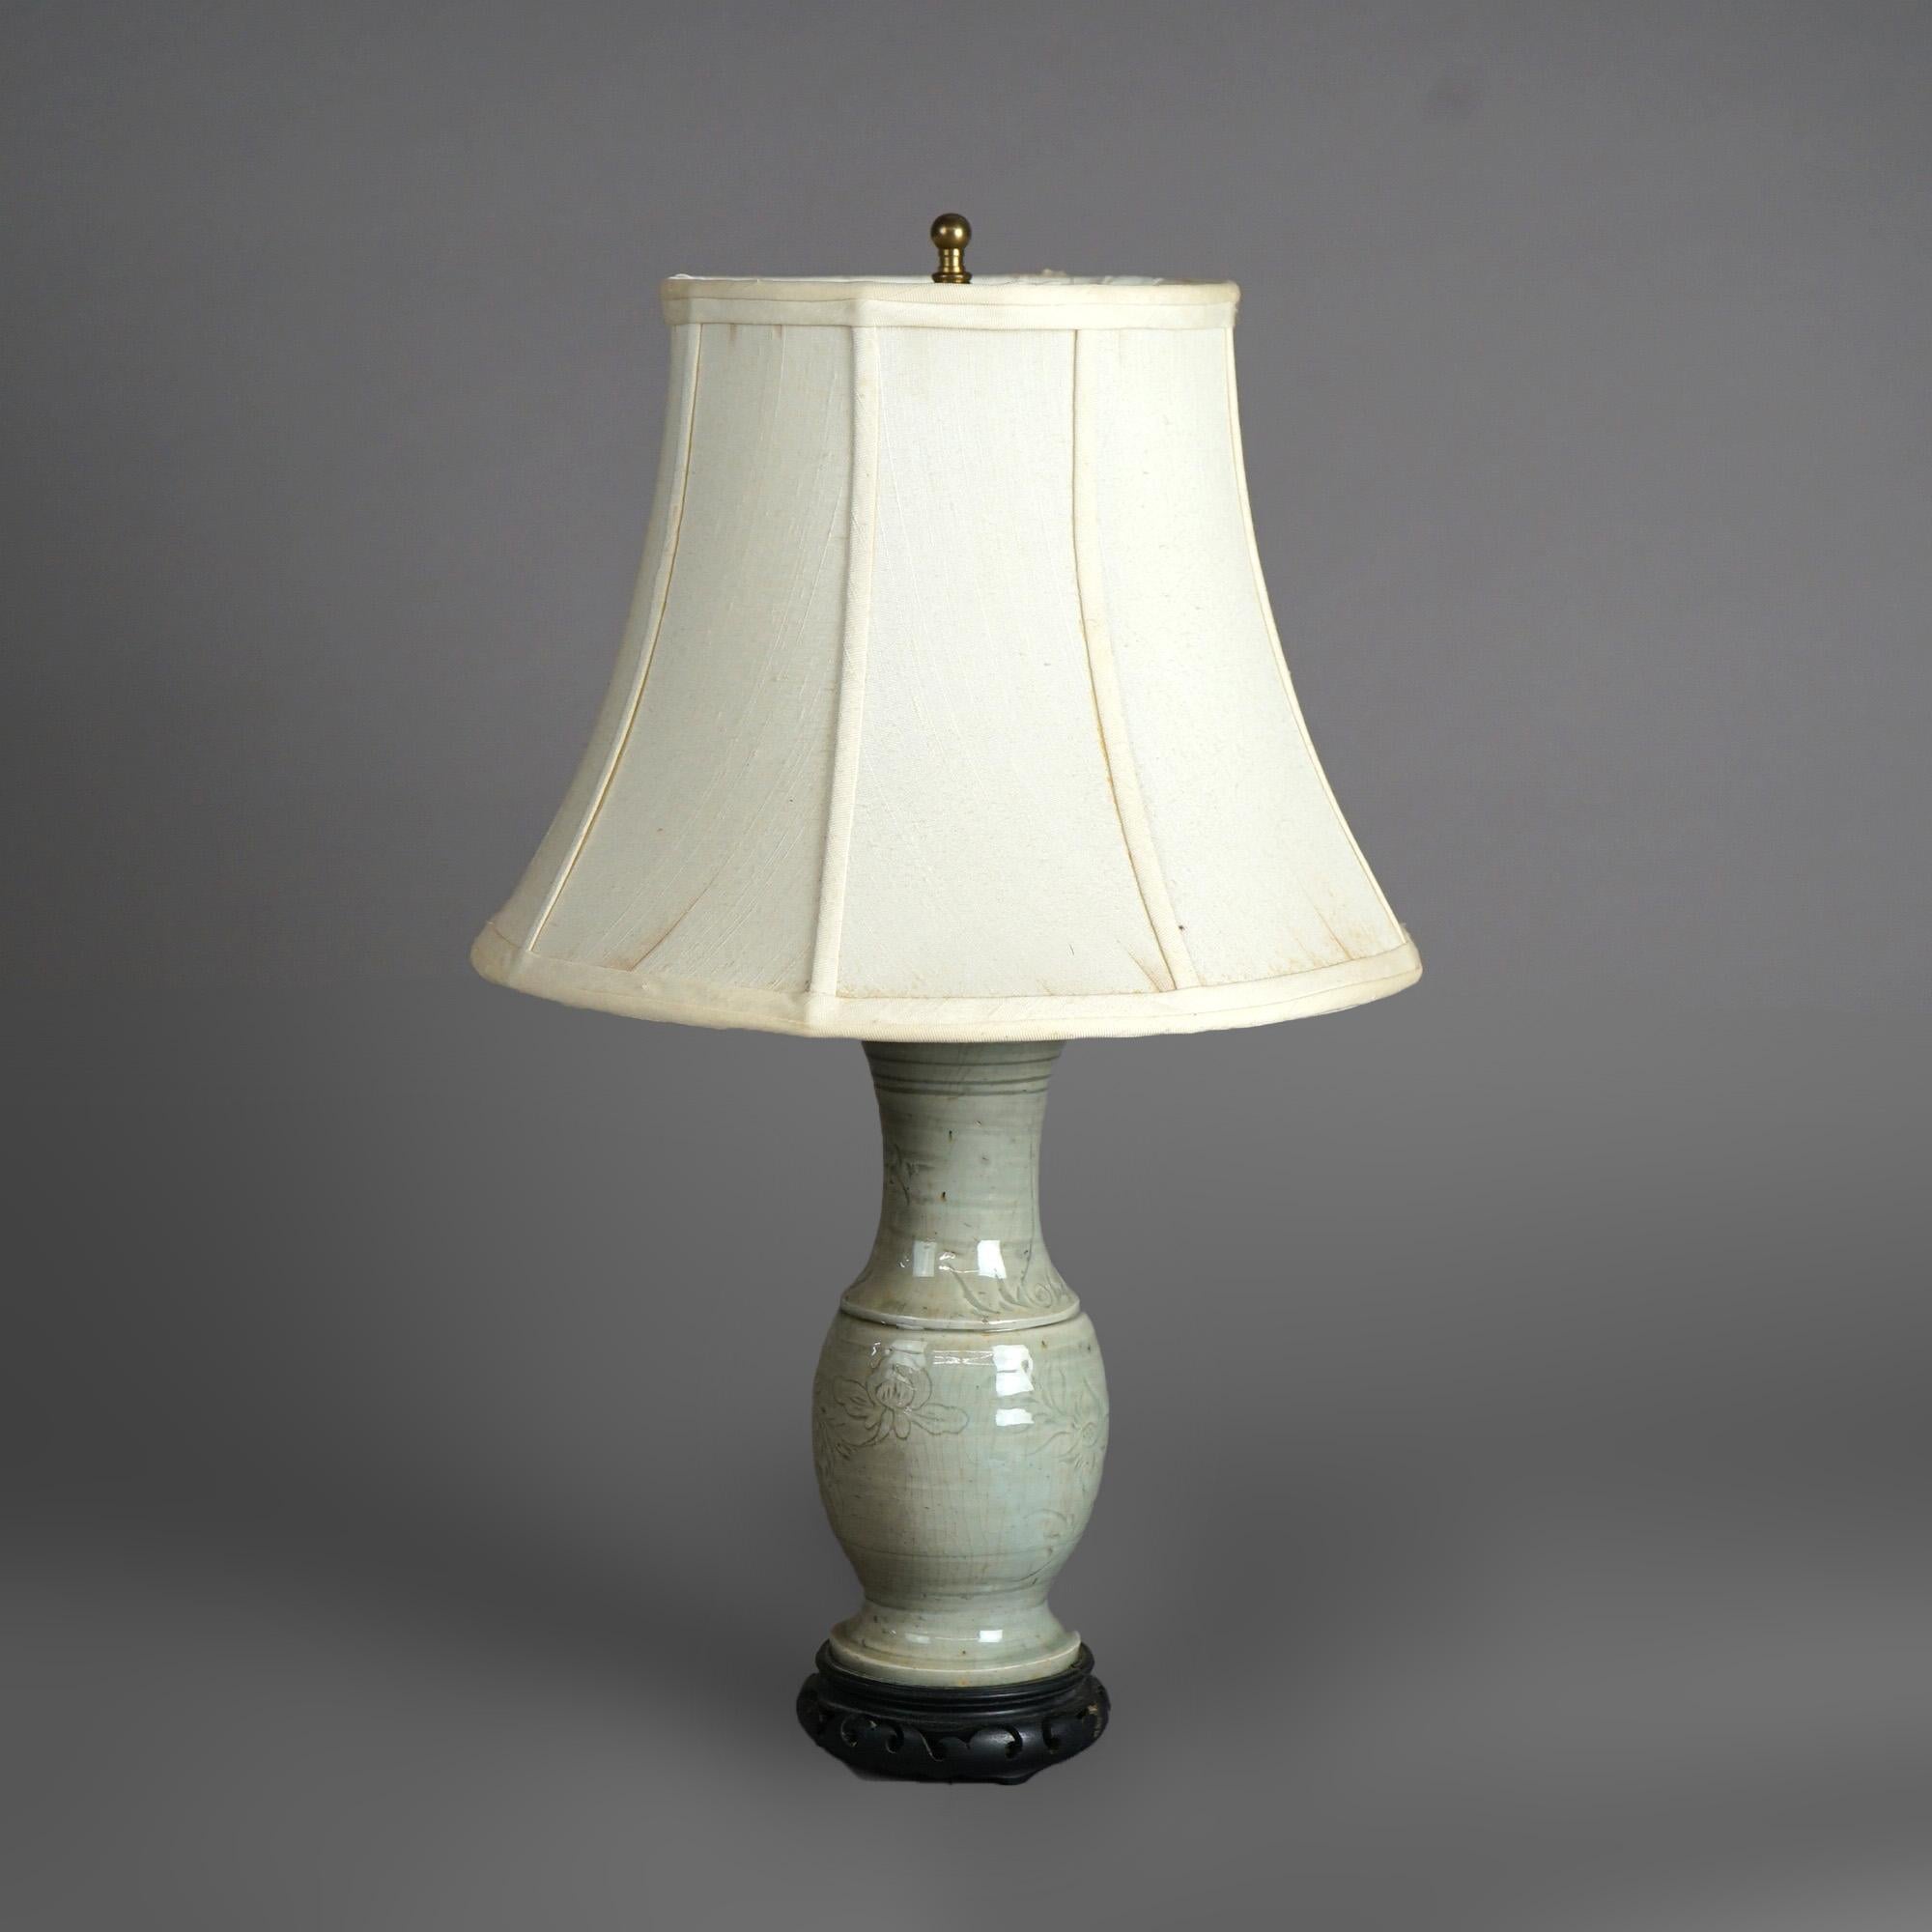 An antique table lamp offers Chinese art pottery vase with incised foliate decoration and crazed celedon glazing, c1930

Measures - 20.25